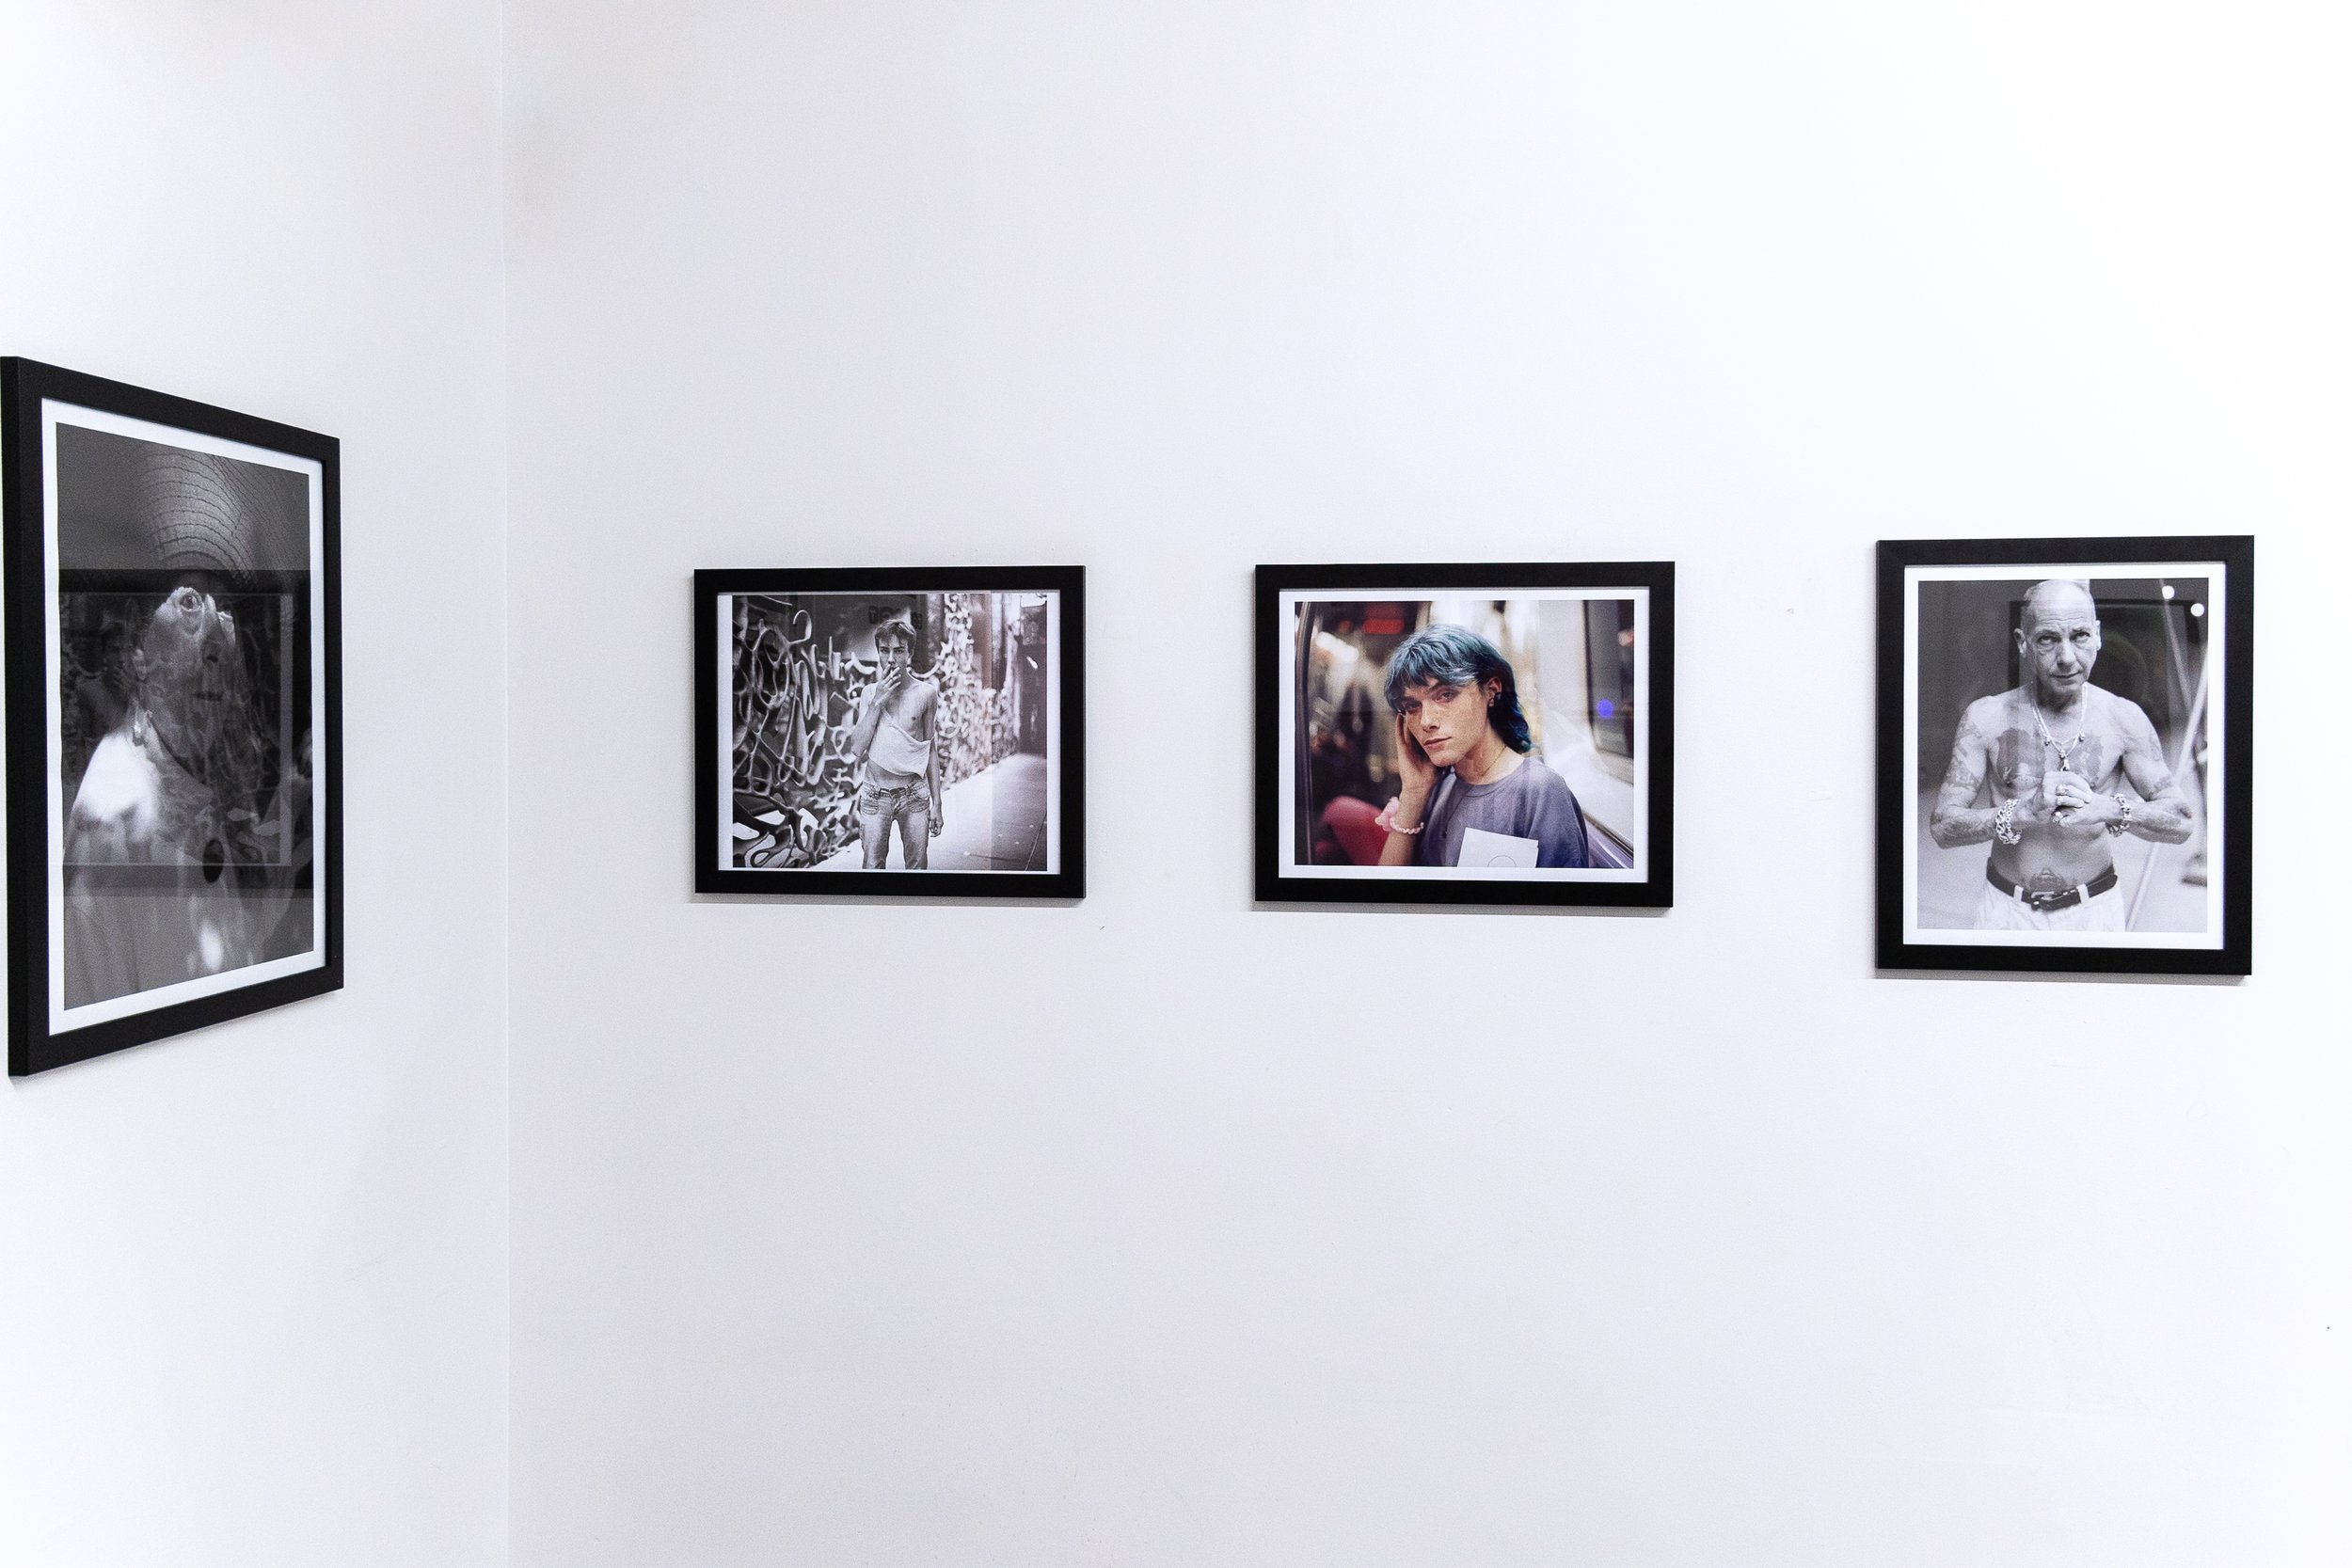   ‘14 Portraits of NYC’ at  NYC-SPC Contact Gallery, August 21st 2022. 